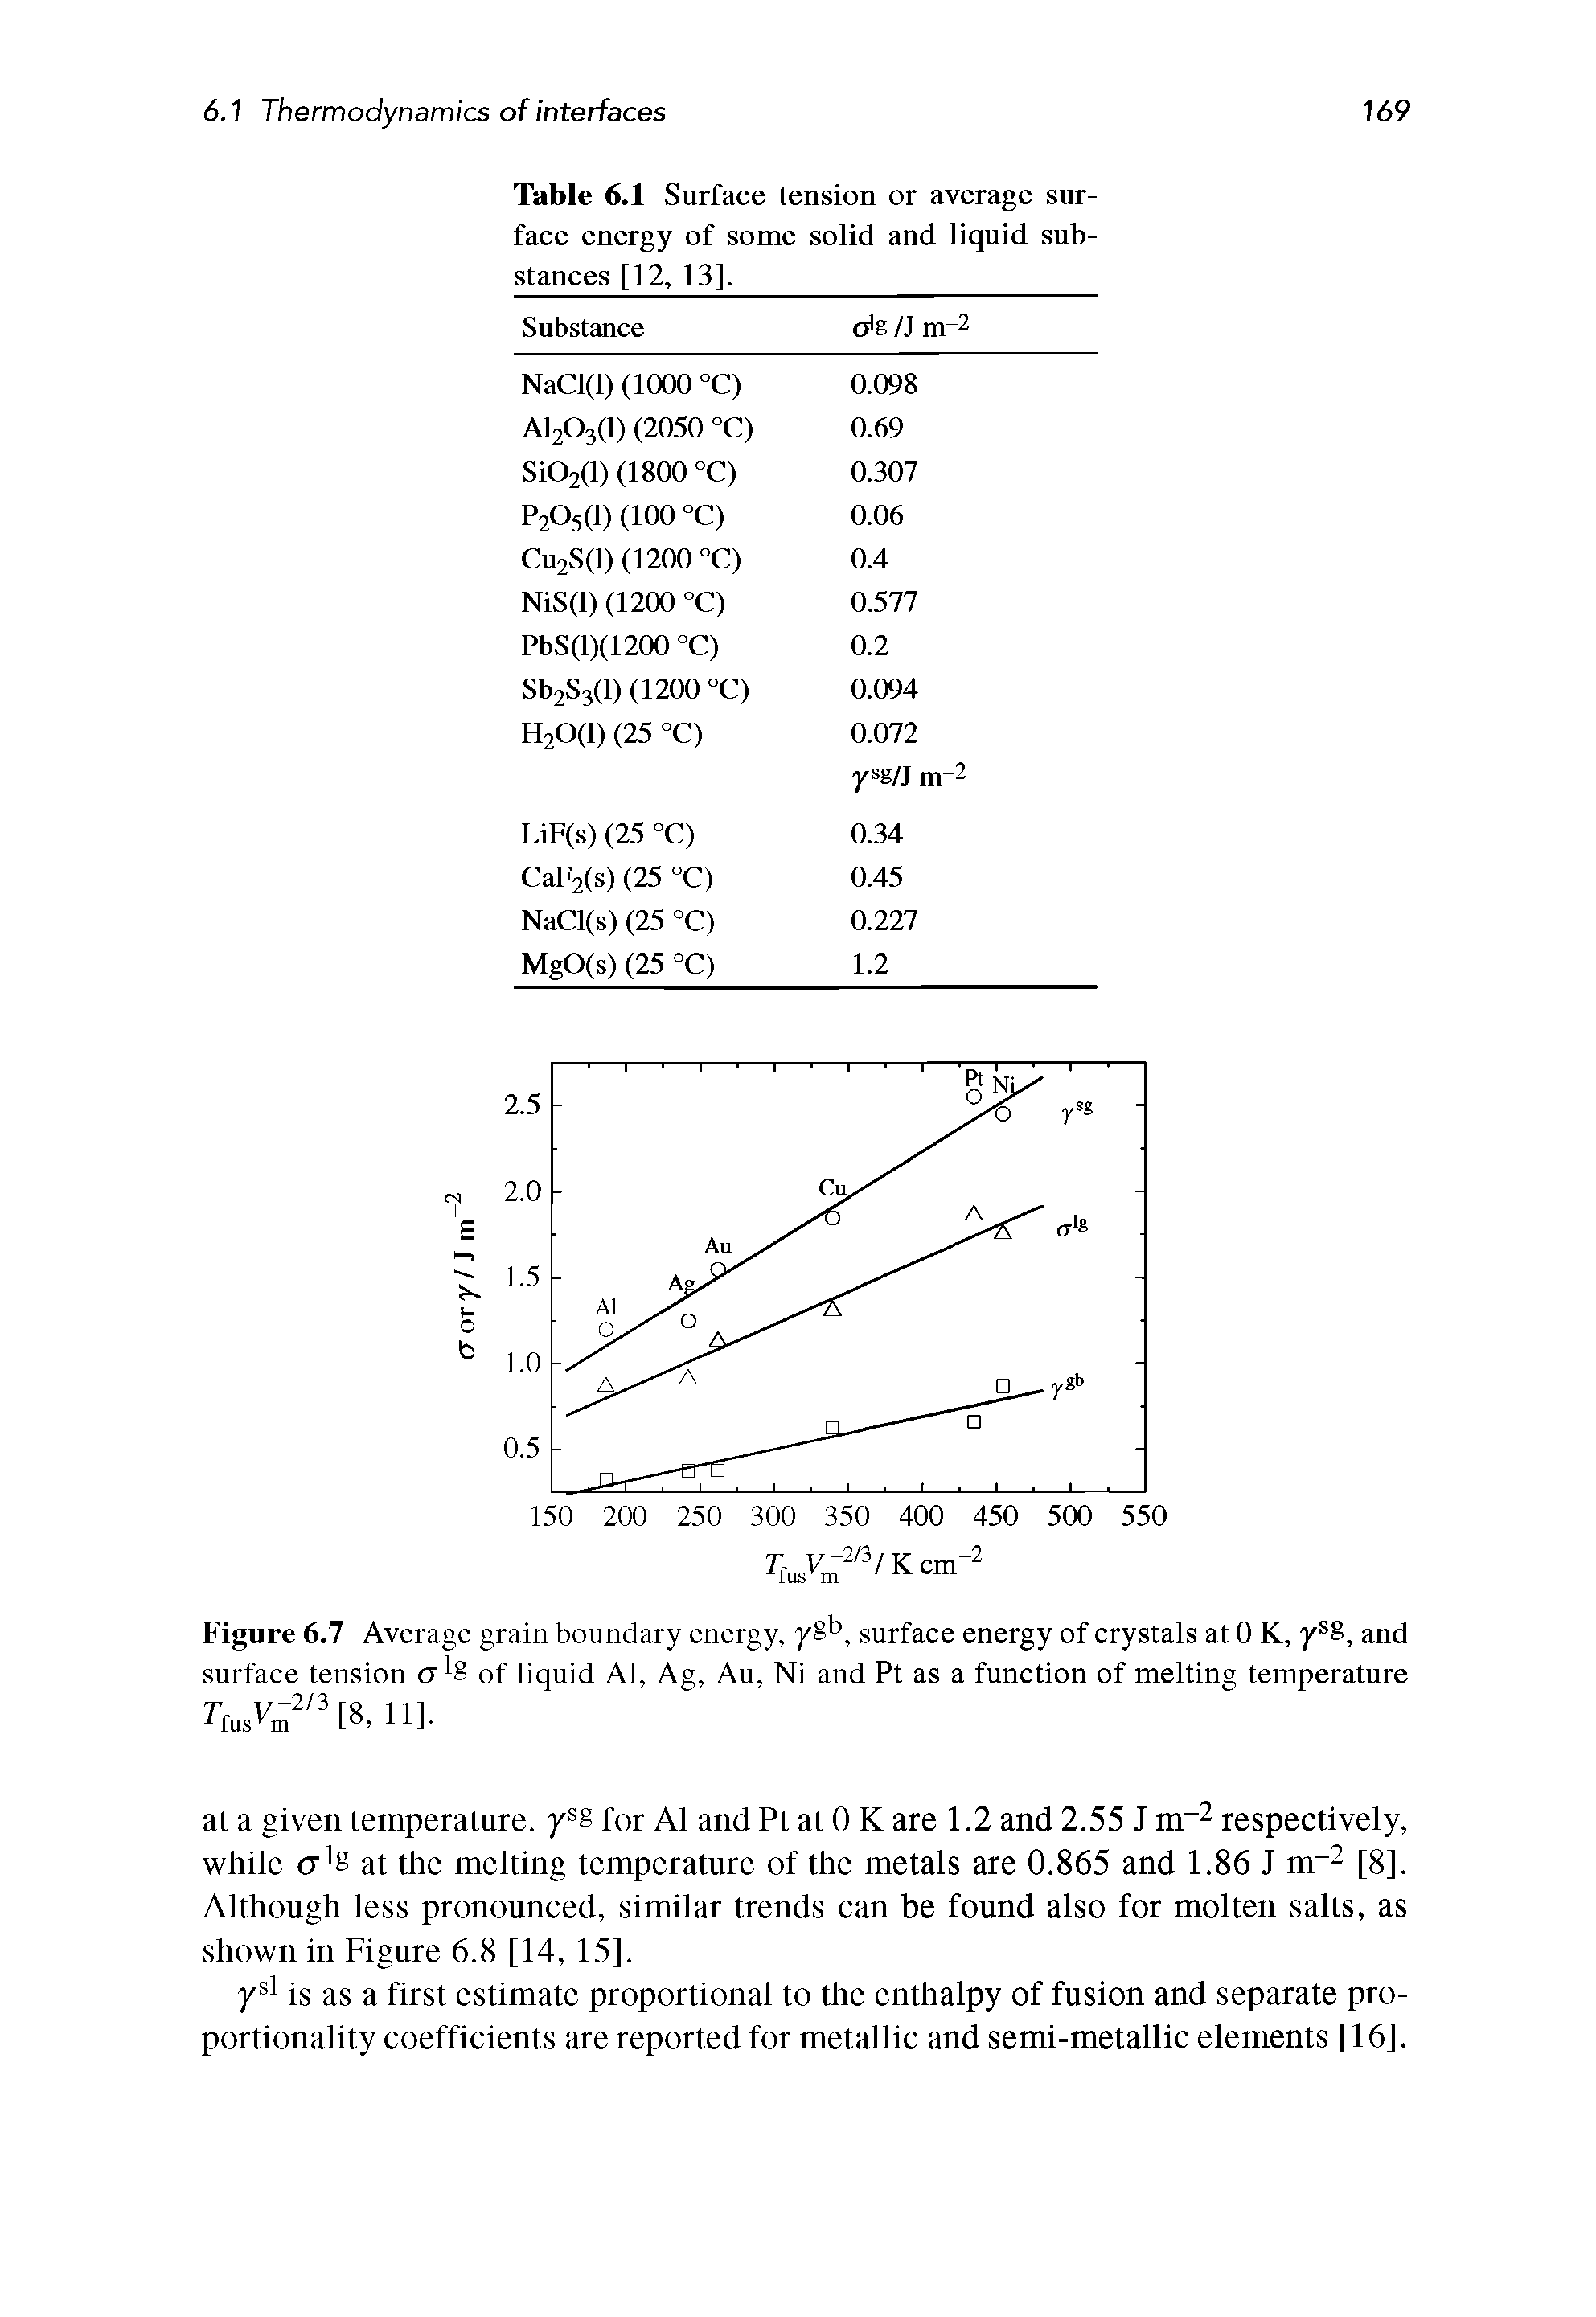 Figure 6.7 Average grain boundary energy, y b, surface energy of crystals at 0 K, ysS, and surface tension of liquid Al, Ag, Au, Ni and Pt as a function of melting temperature 7W 2/3[8, 11],...